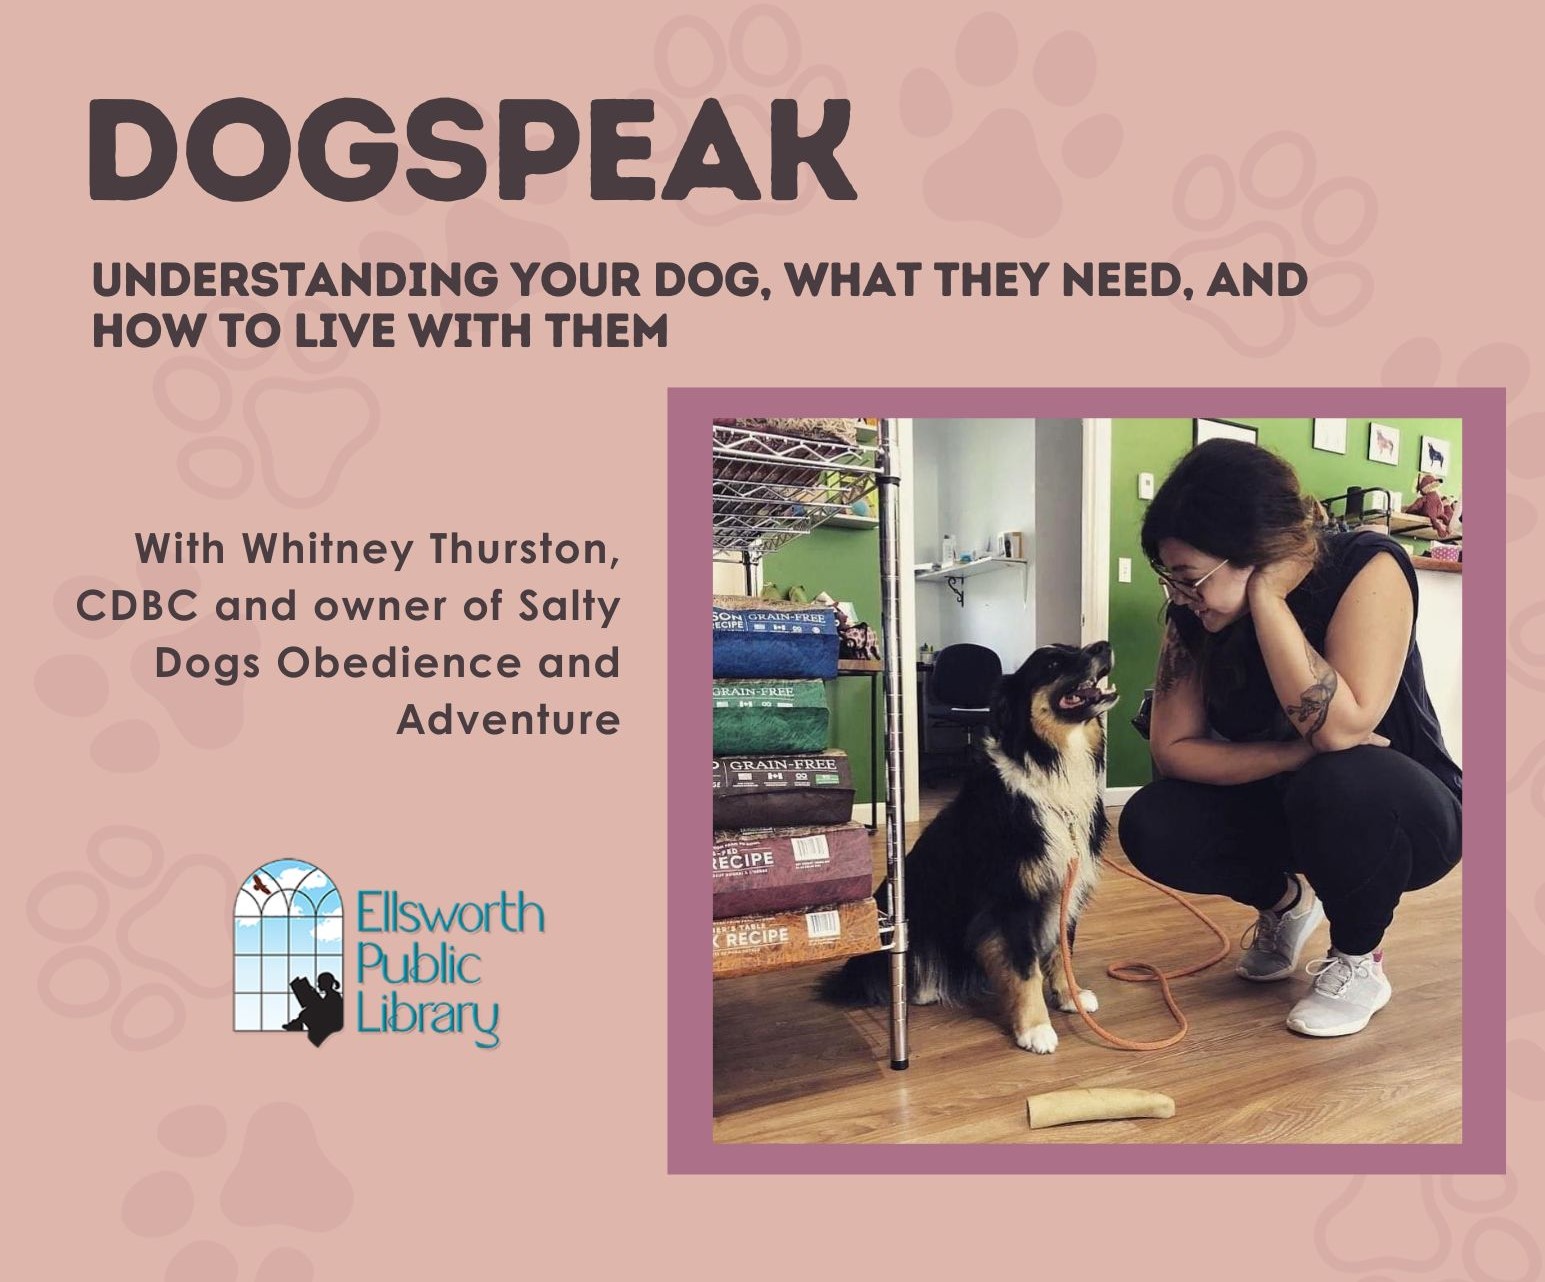 DOGSPEAK: Understanding Your Dog, What They Need, and How To Live With Them 